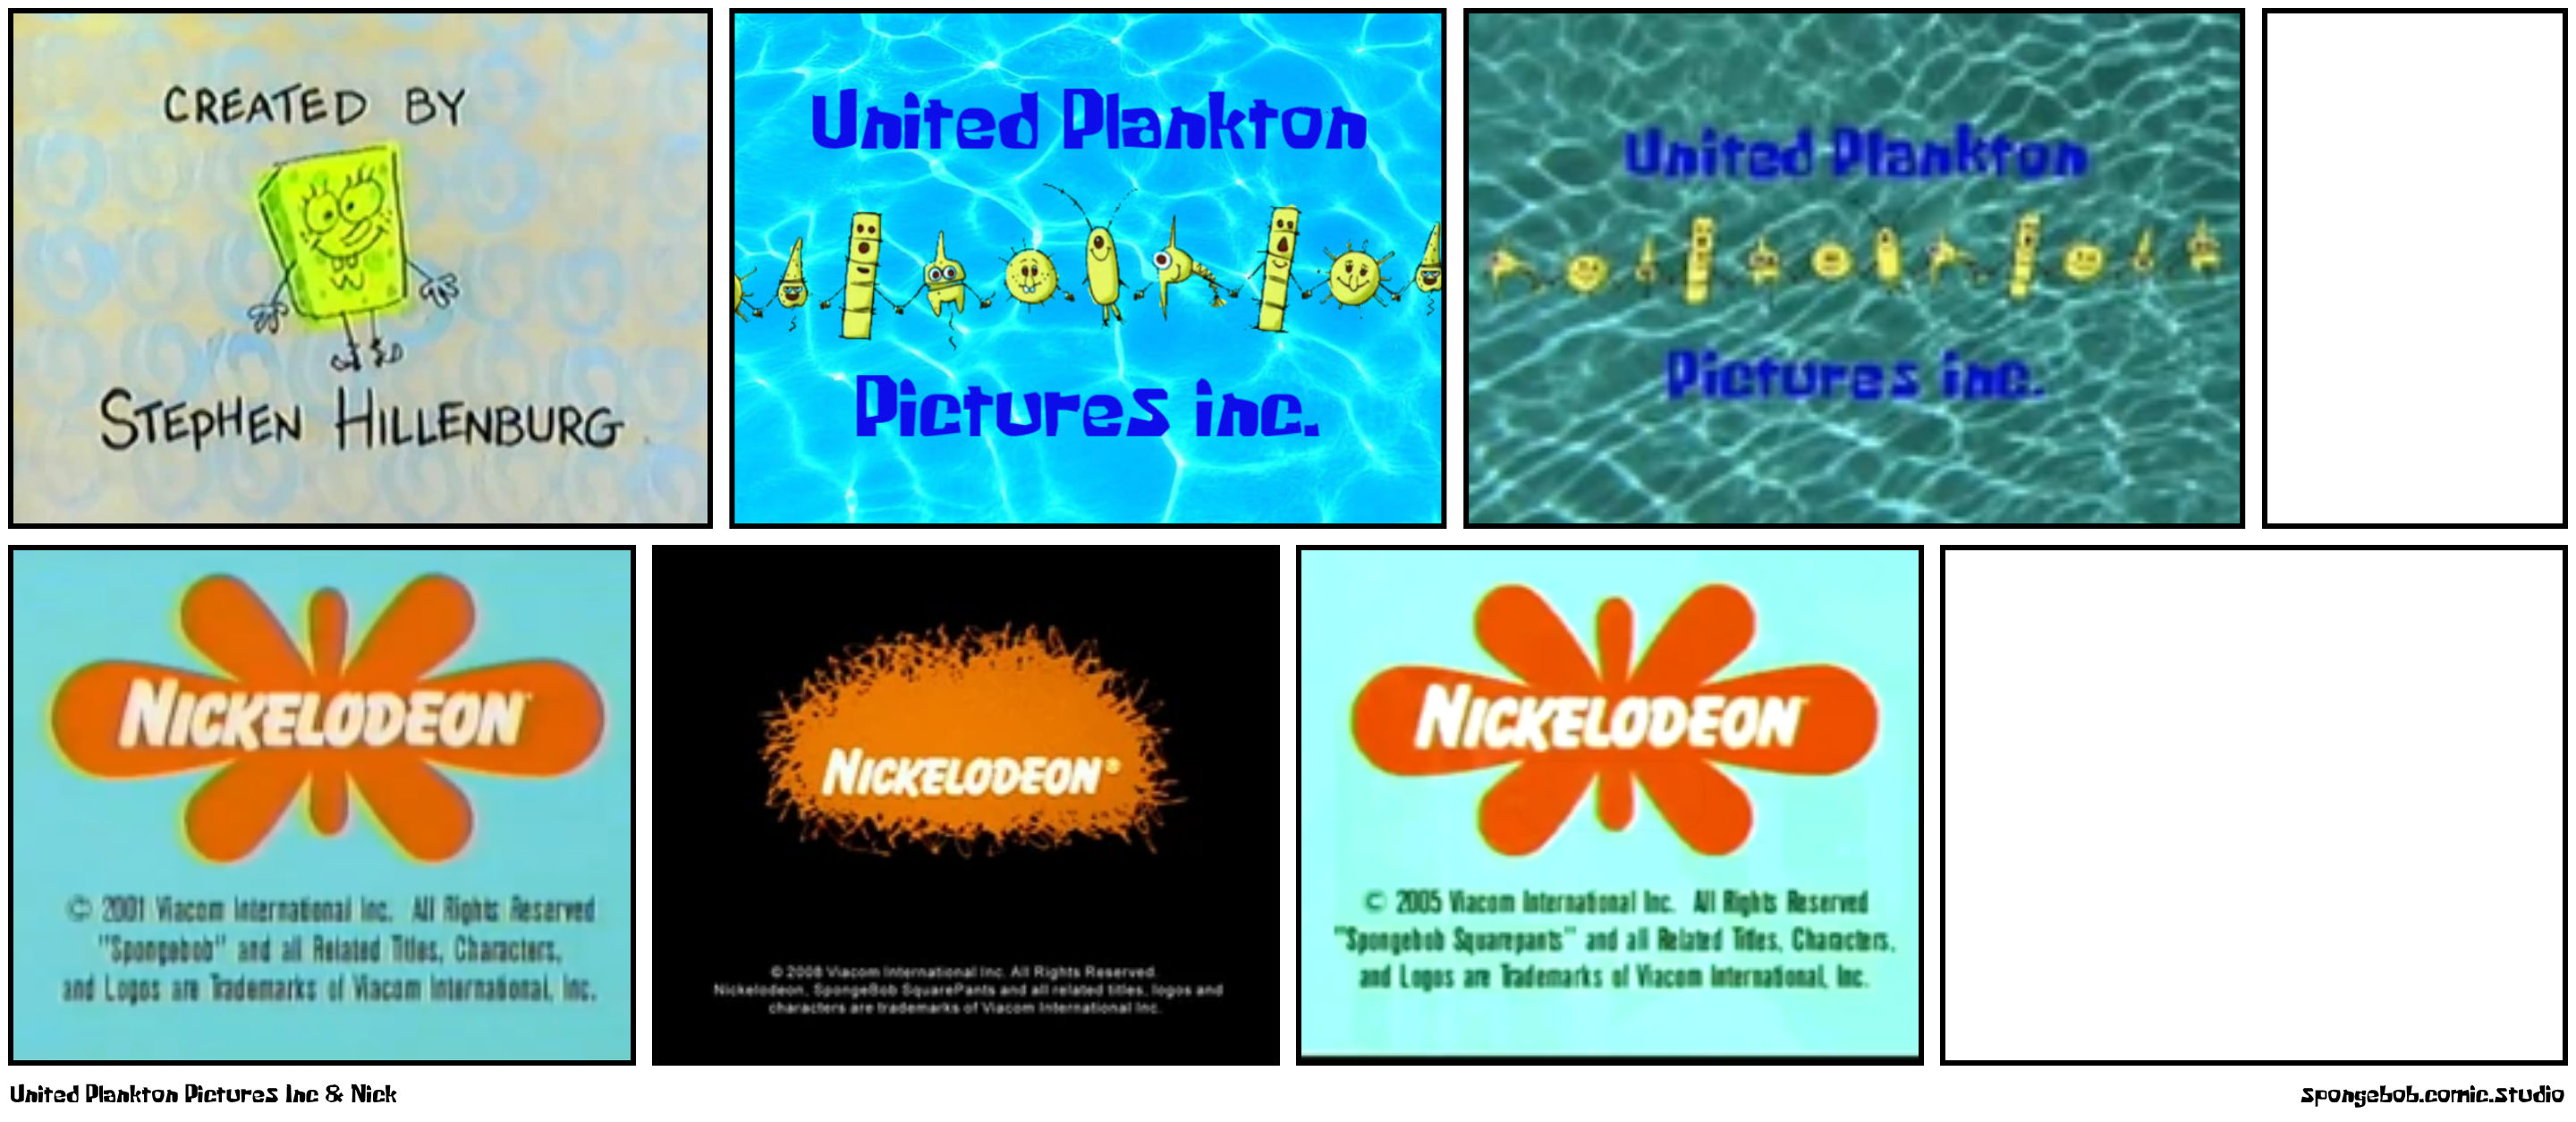 United Plankton Pictures Inc & Nick